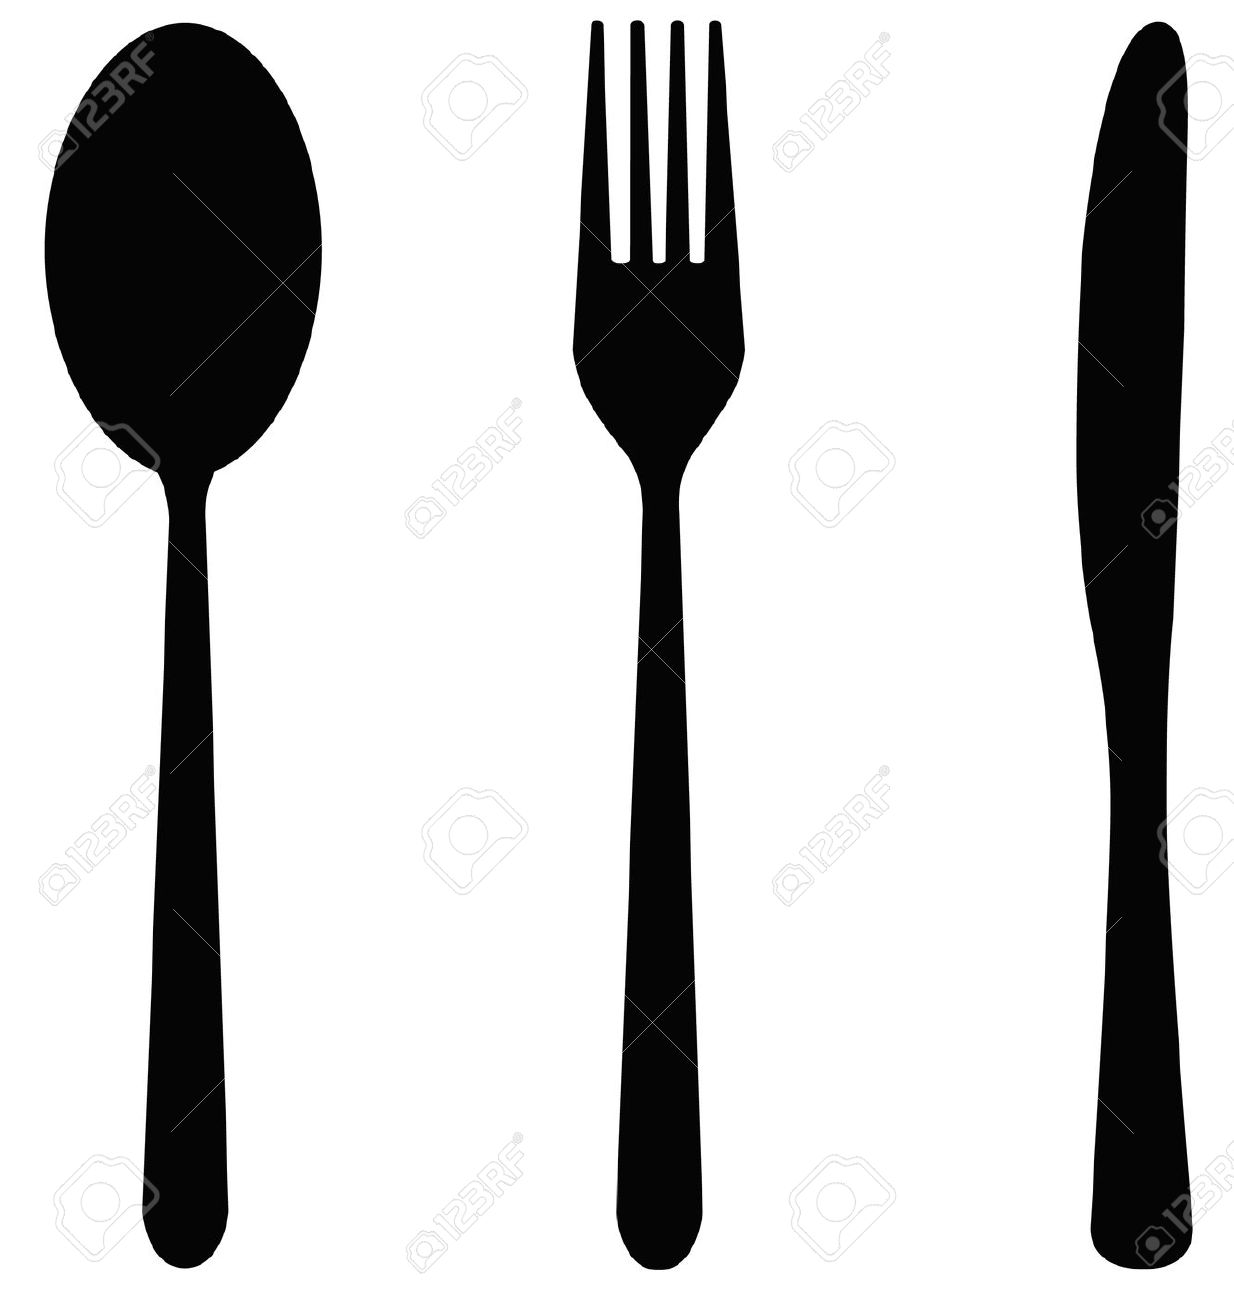 238 Fork And Knife free clipart.